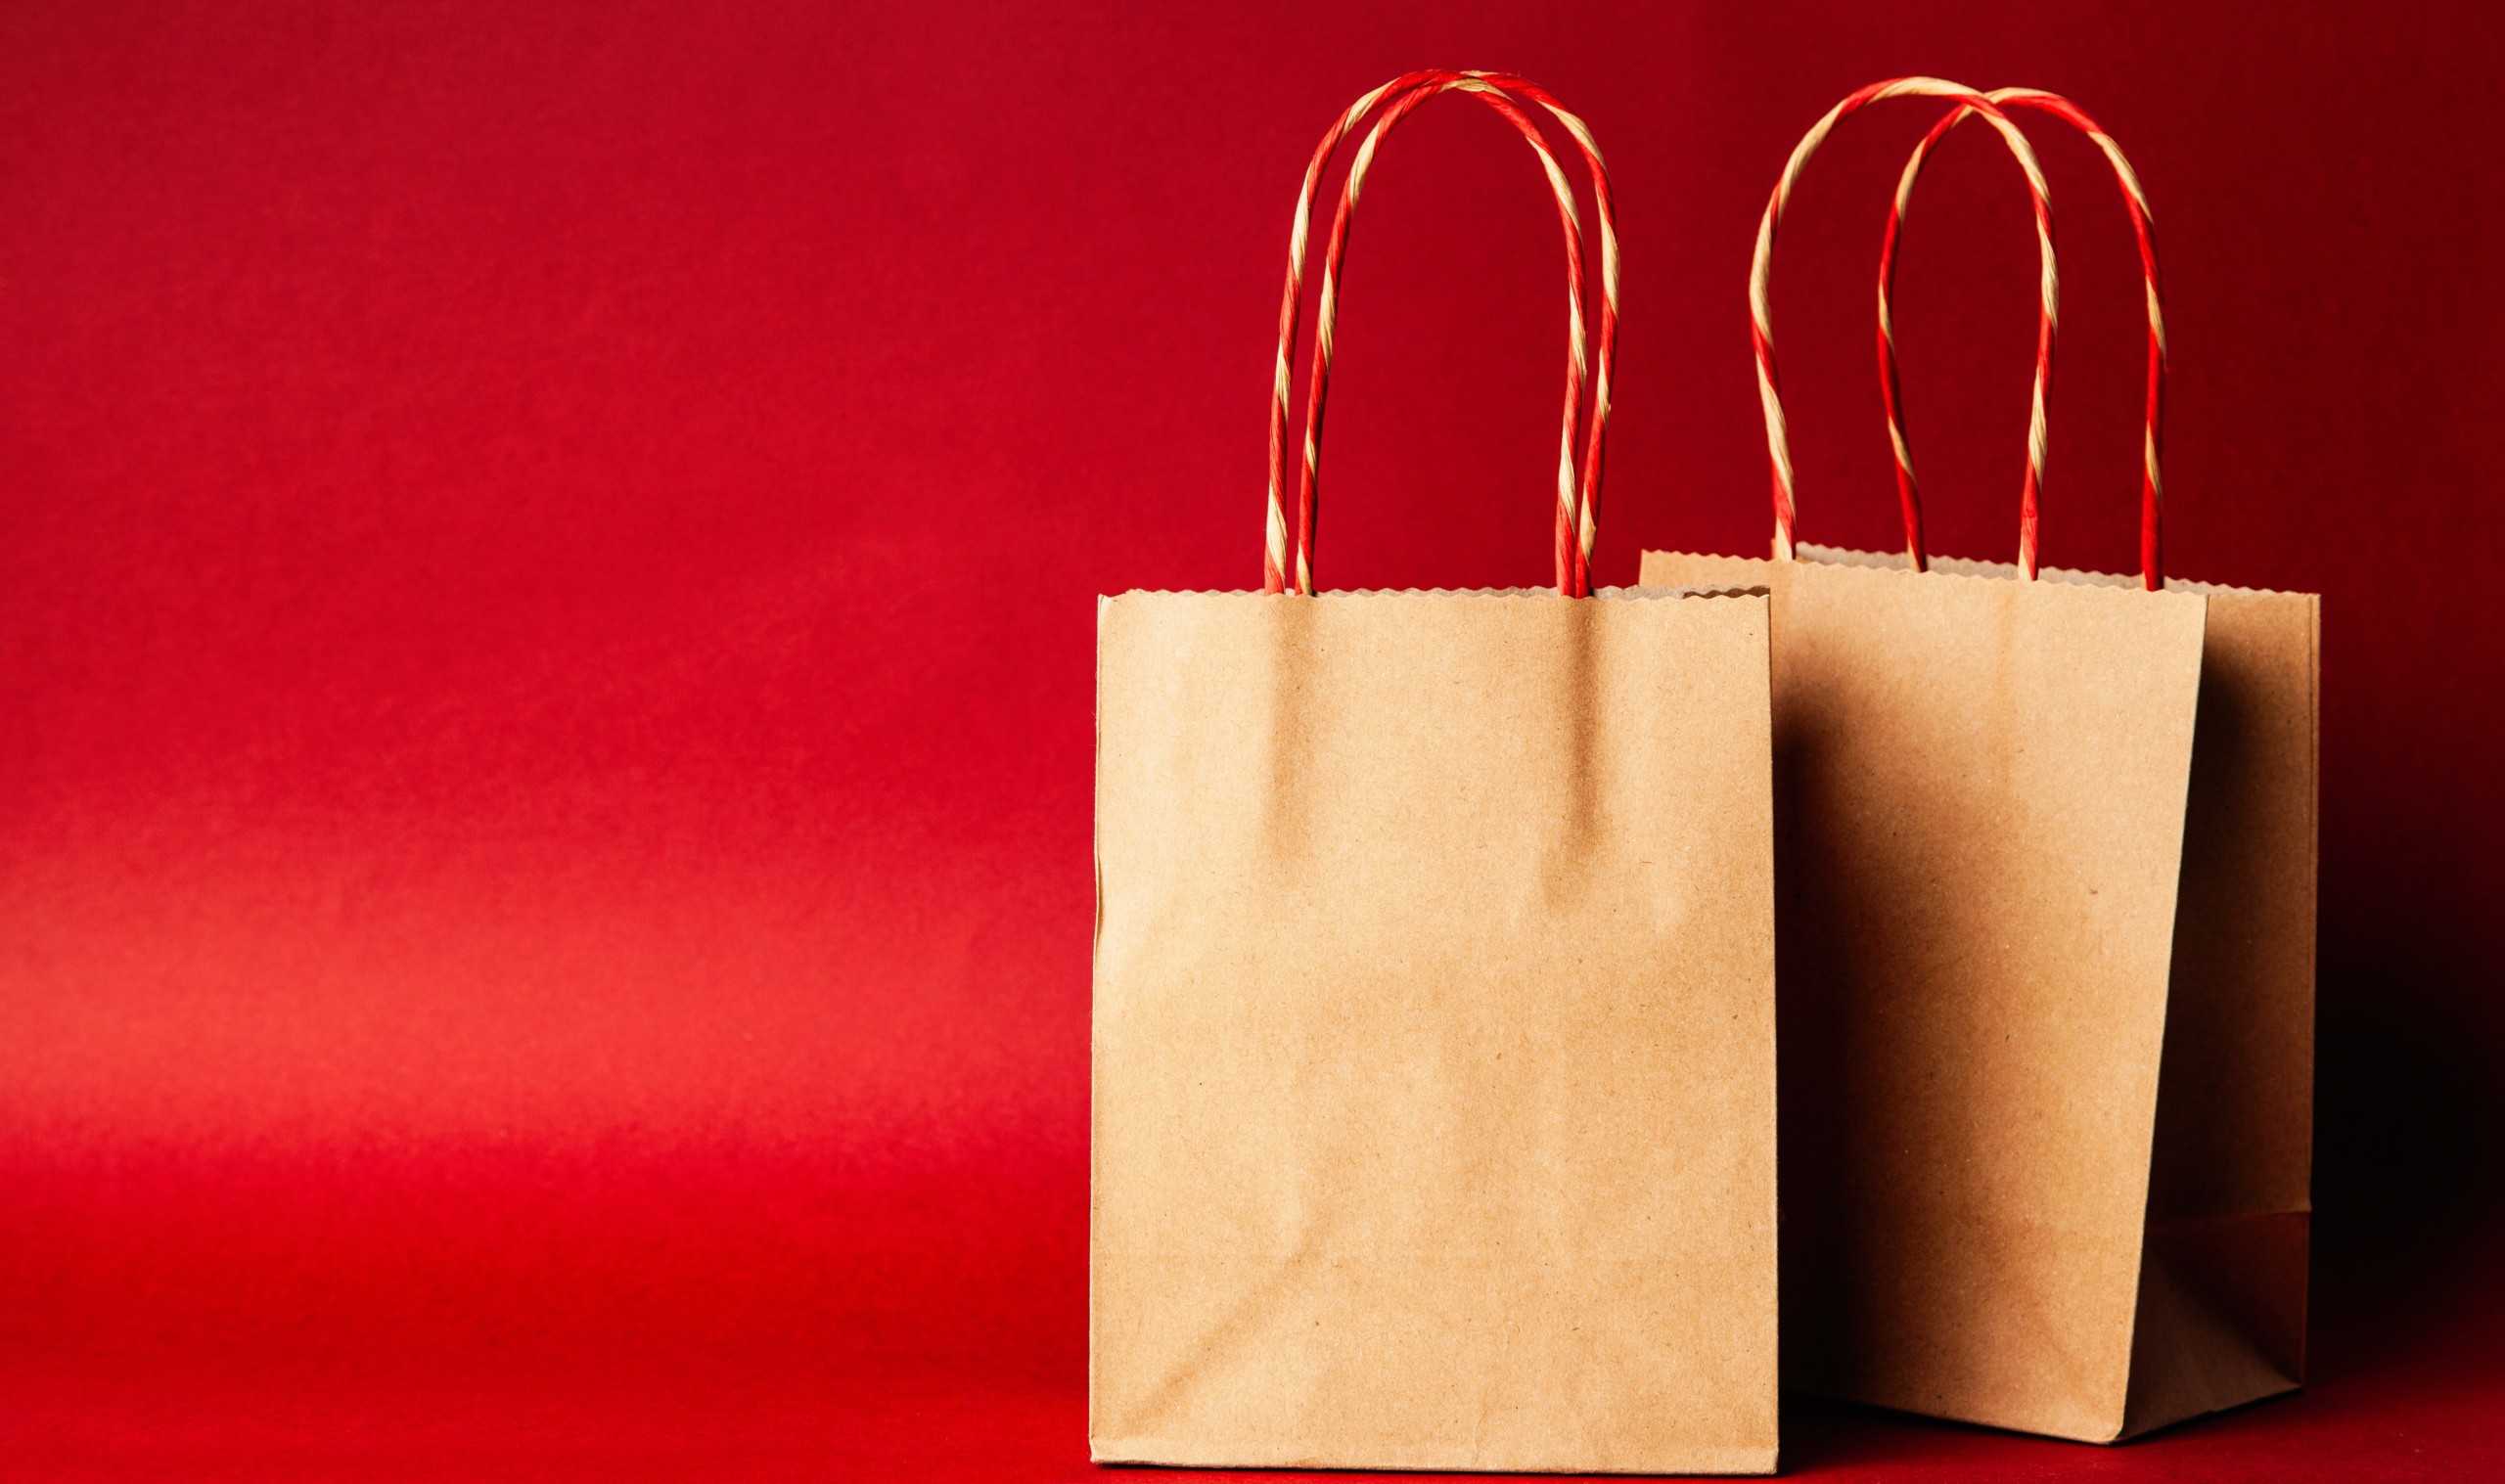 Two brown paper shopping bags on a red background.